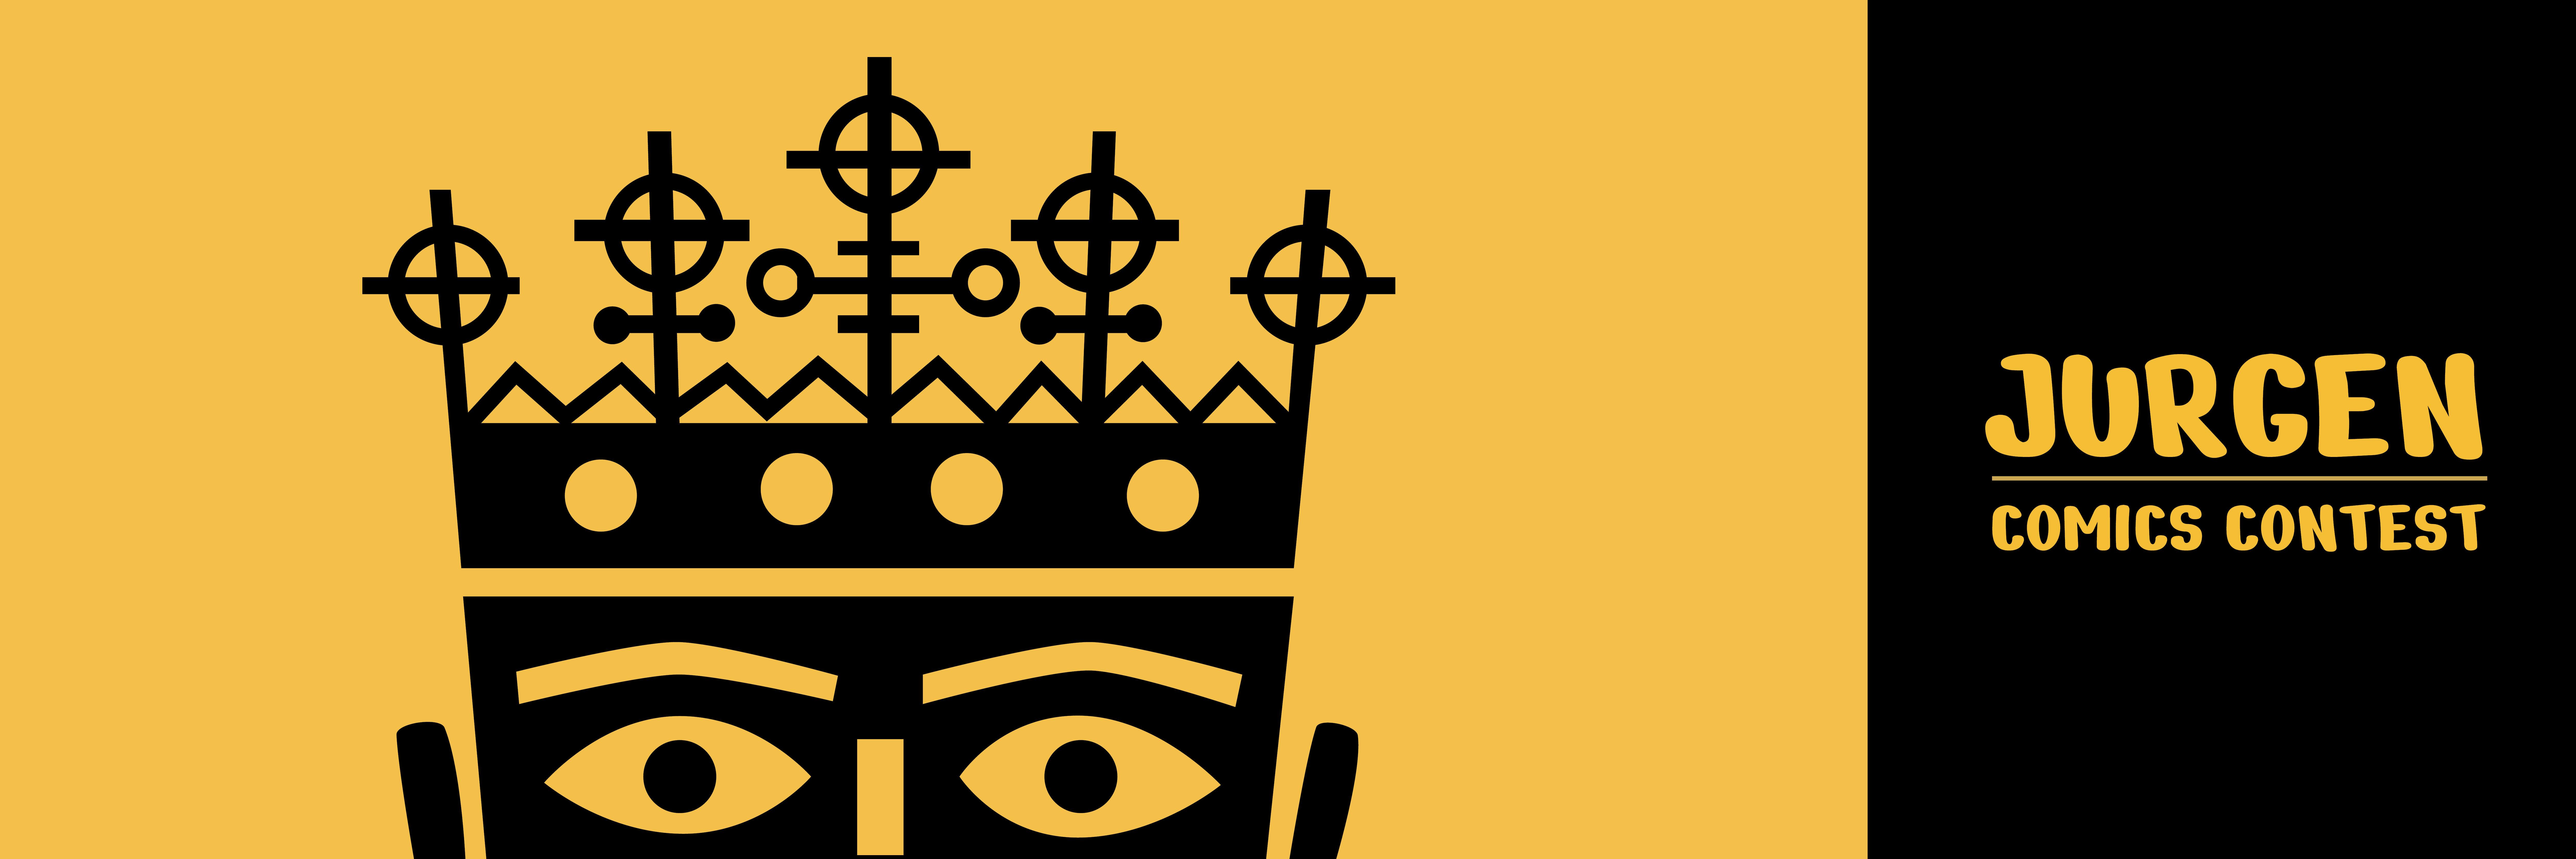 A graphic illustration of a head wearing a crown in black on a field of gold with the text 